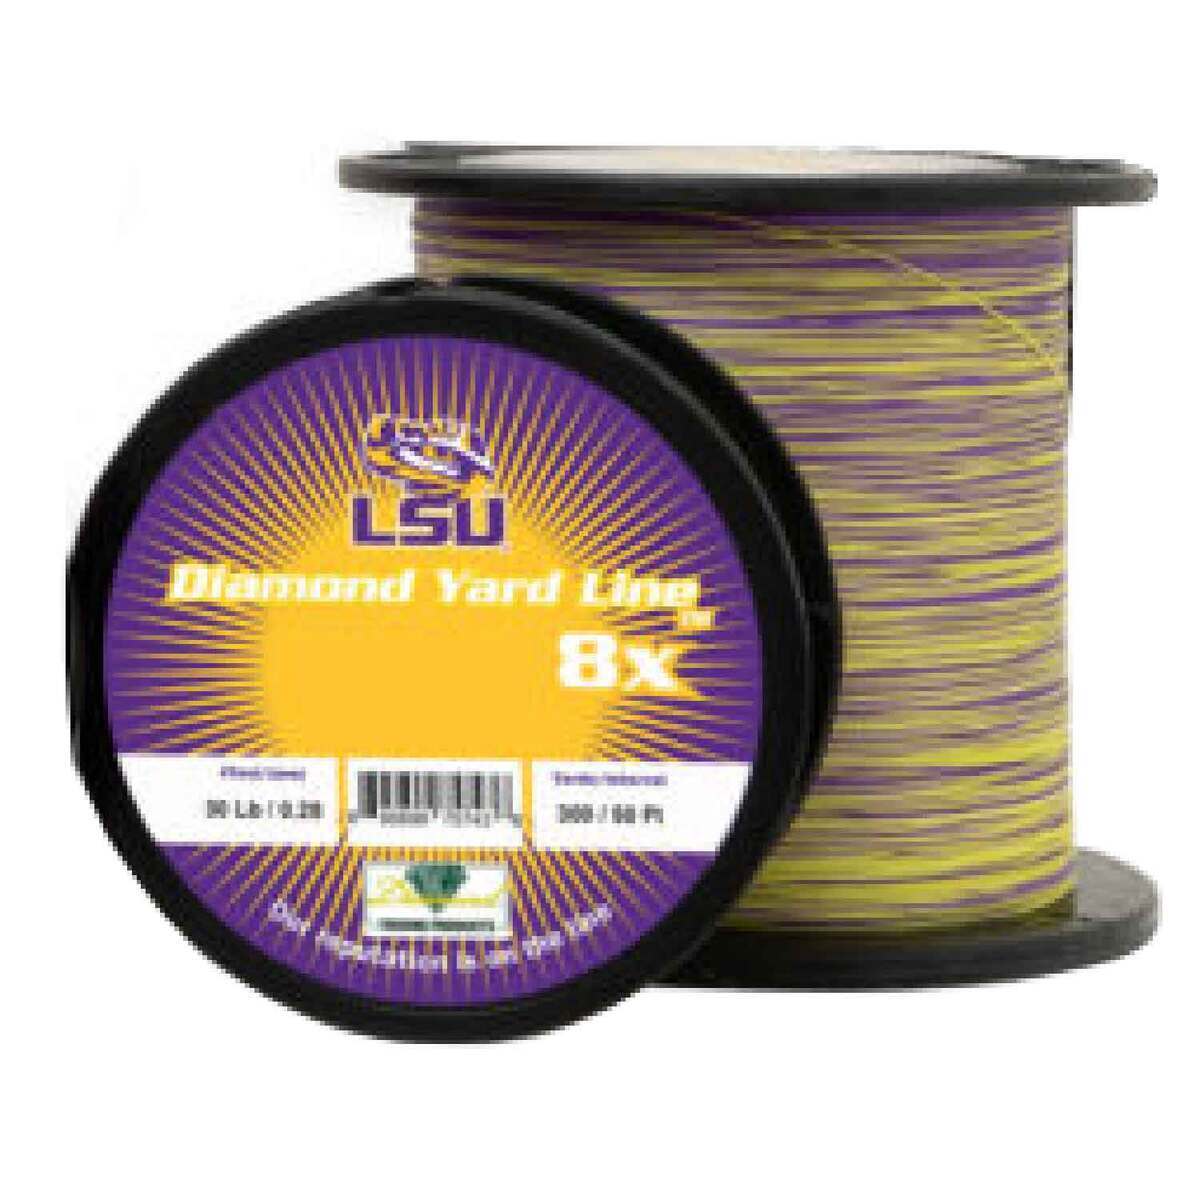 Diamond Yard Line Collegiate 8X Solid Braided Line - 300 yd. - 50 lb. -  BAMA - Red/White - Melton Tackle